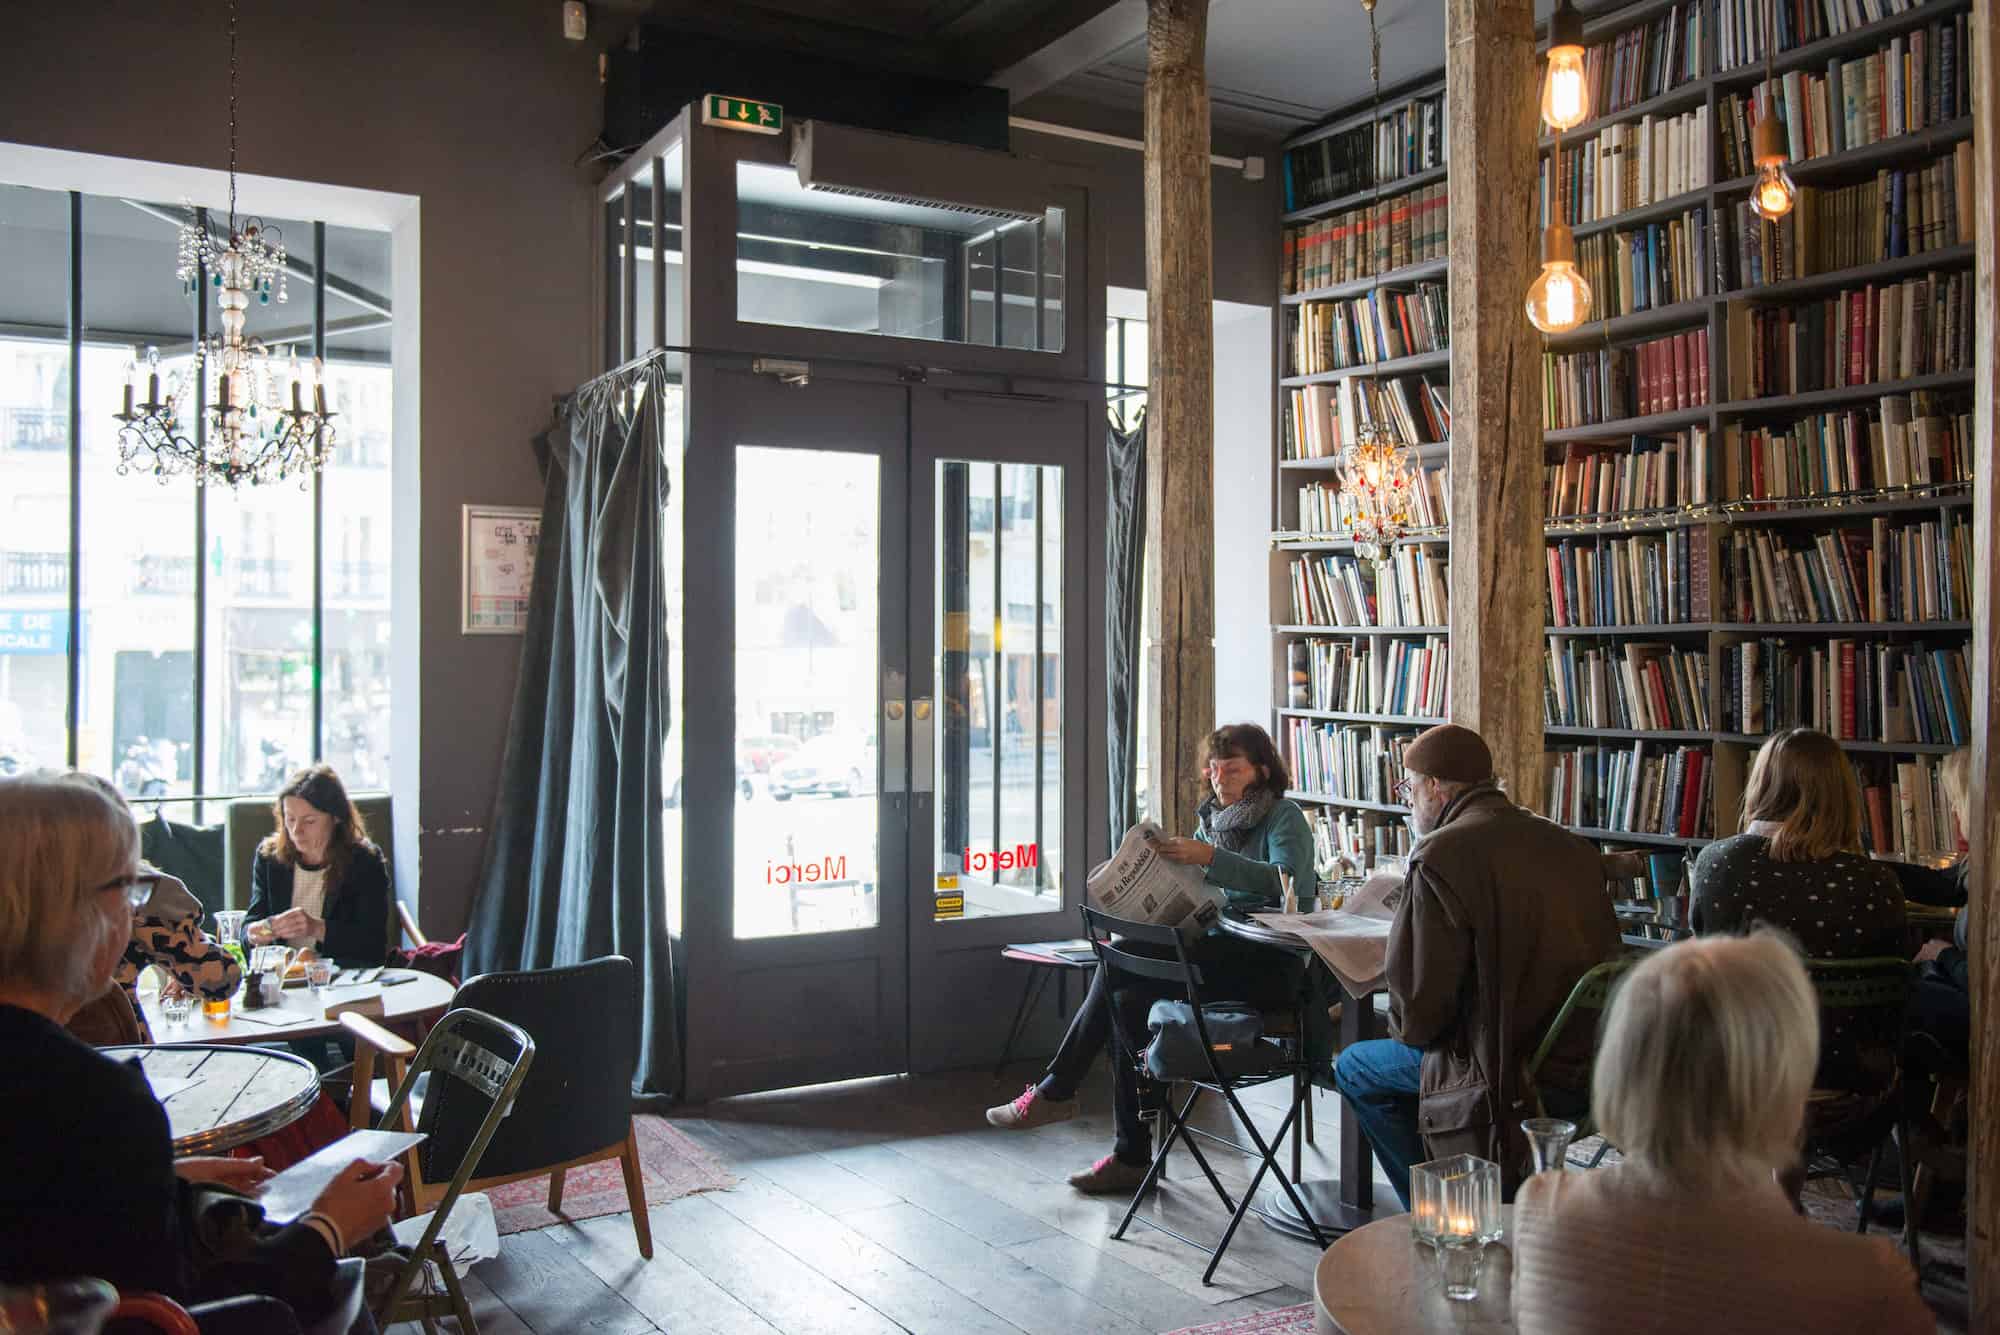 One of our favorite coffee shops in Paris is Merci in the Marais, for its cozy atmosphere and walls lined with bookshelves.